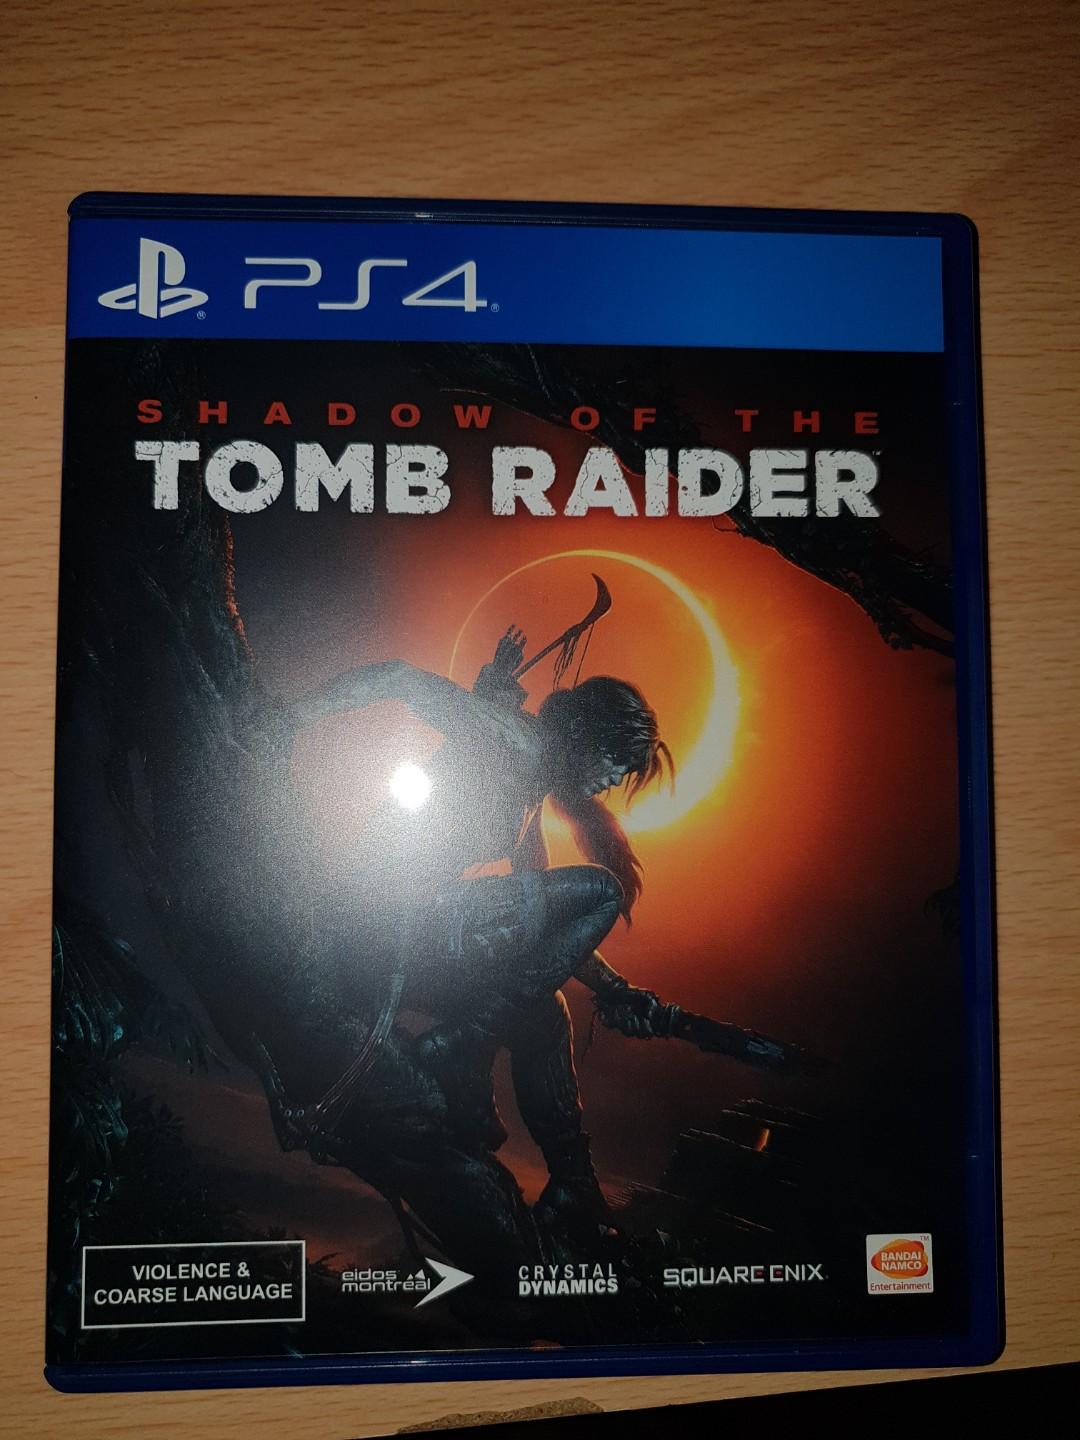 Shadow Of The Tomb Raider Ps4 Toys Games Video Gaming Video Games On Carousell